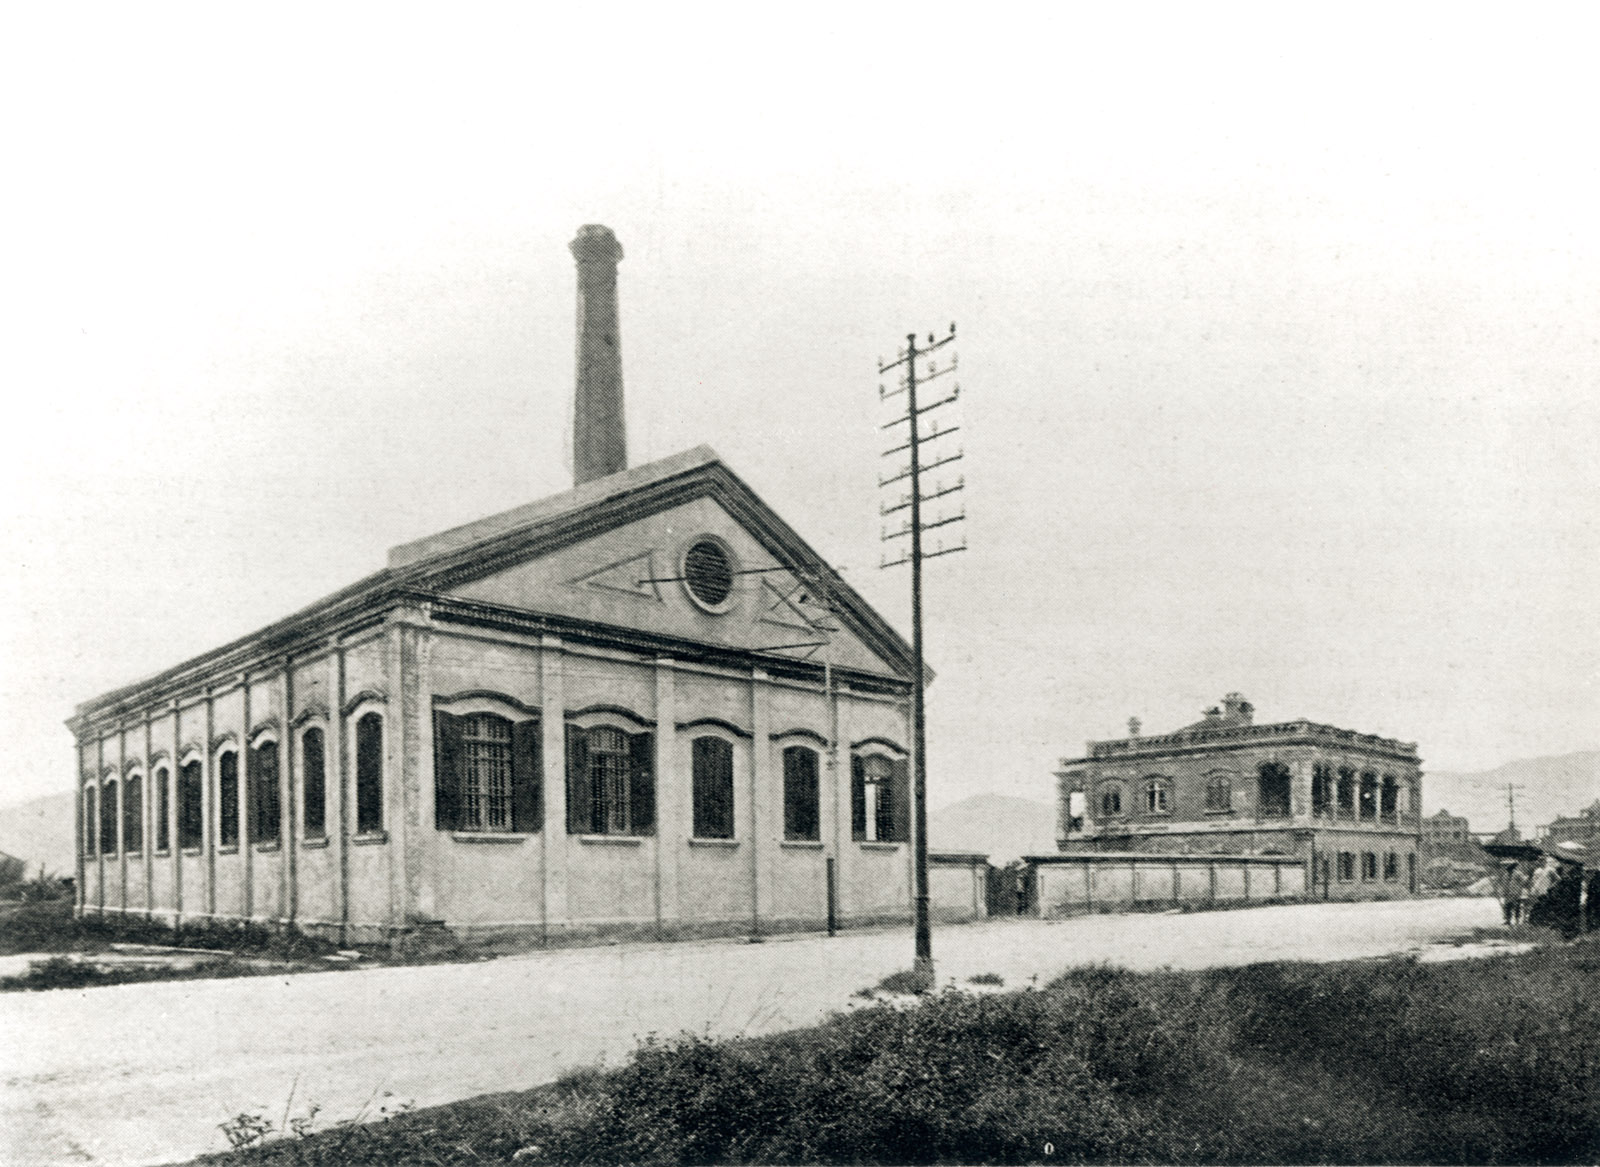 CLP's first power station at Chatham Road (1903)